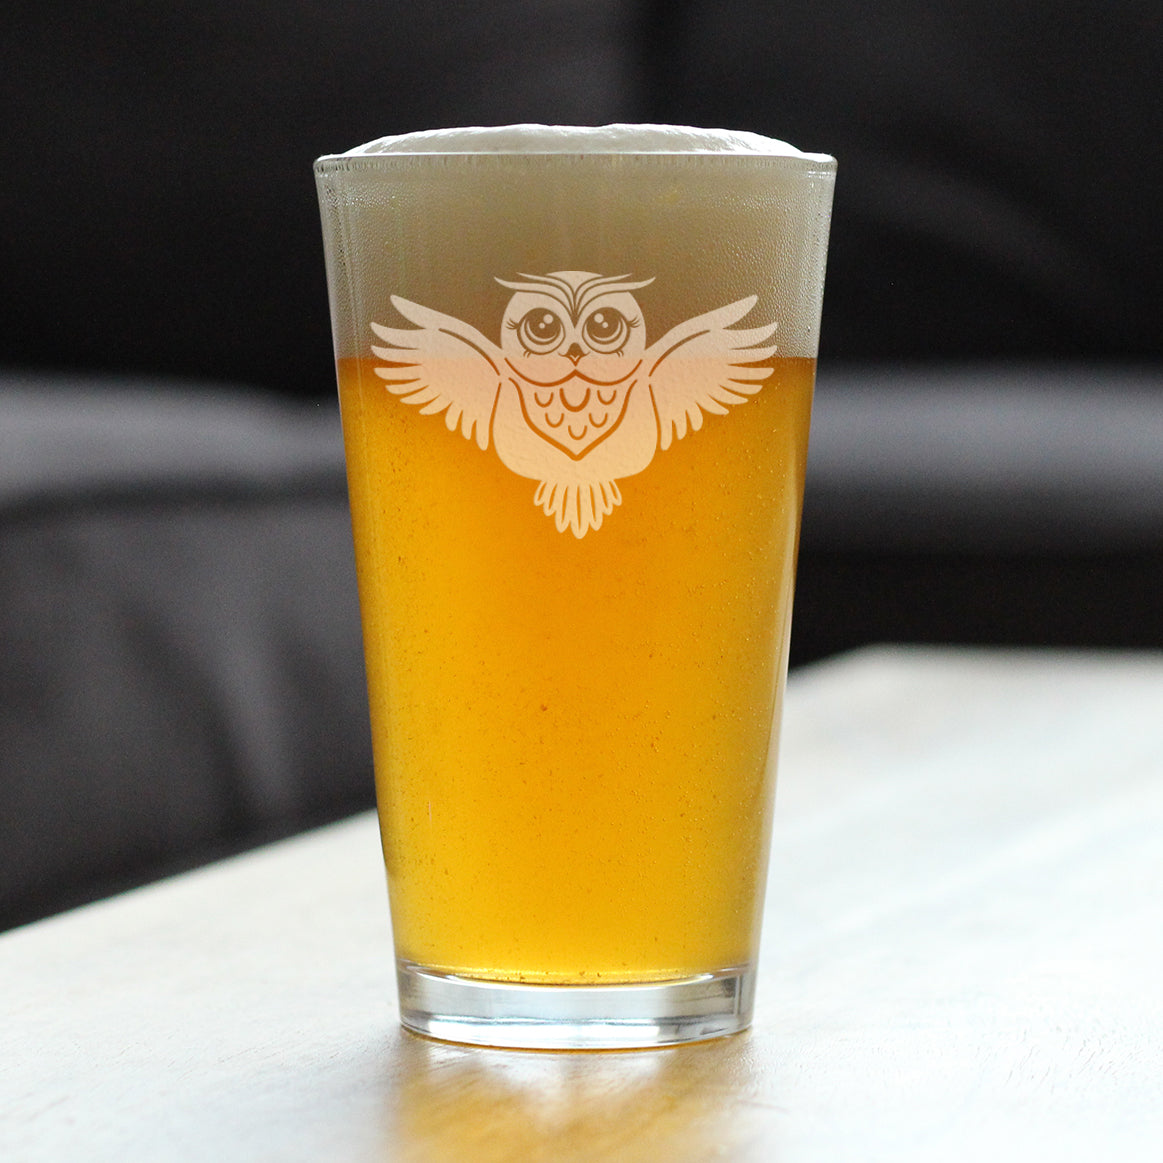 Cute Owl Pint Glass for Beer - Fun Owl Decor and Gifts for Women and Men - 16 Oz Glasses